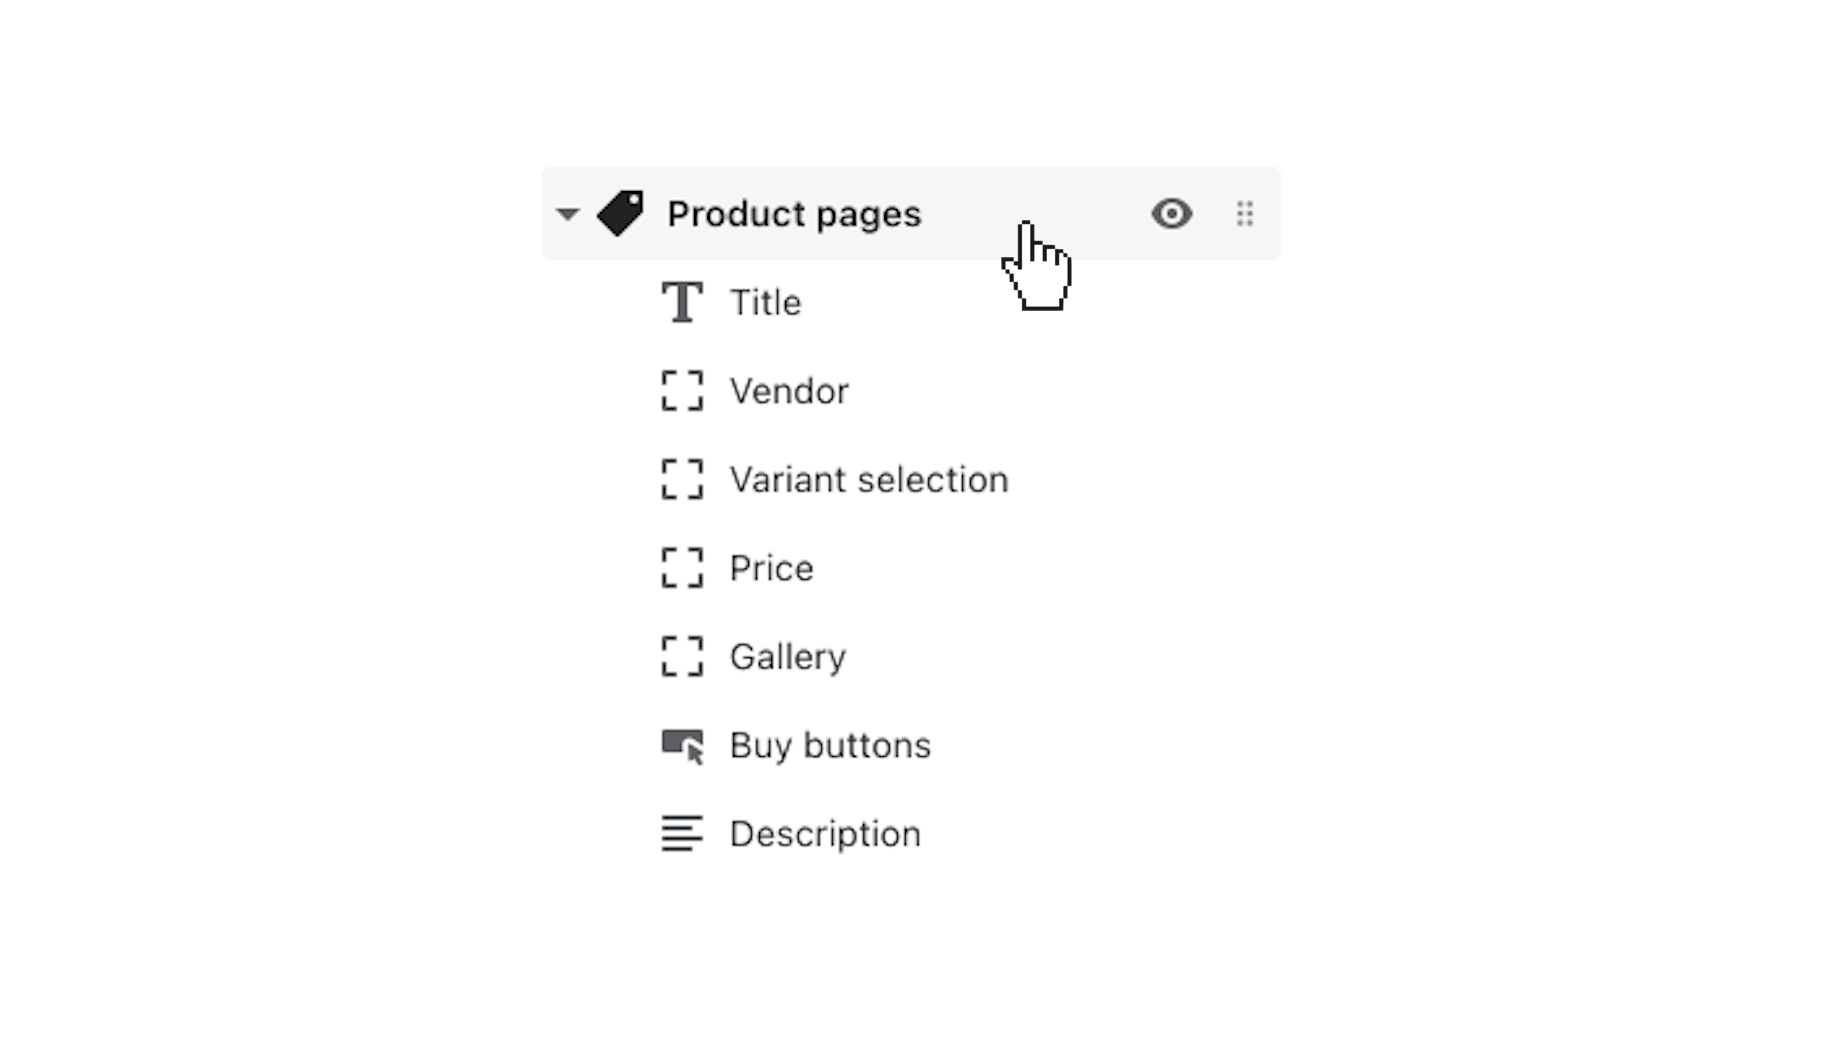 click_product_pages_to_open_general_settings_for_the_product_page.png